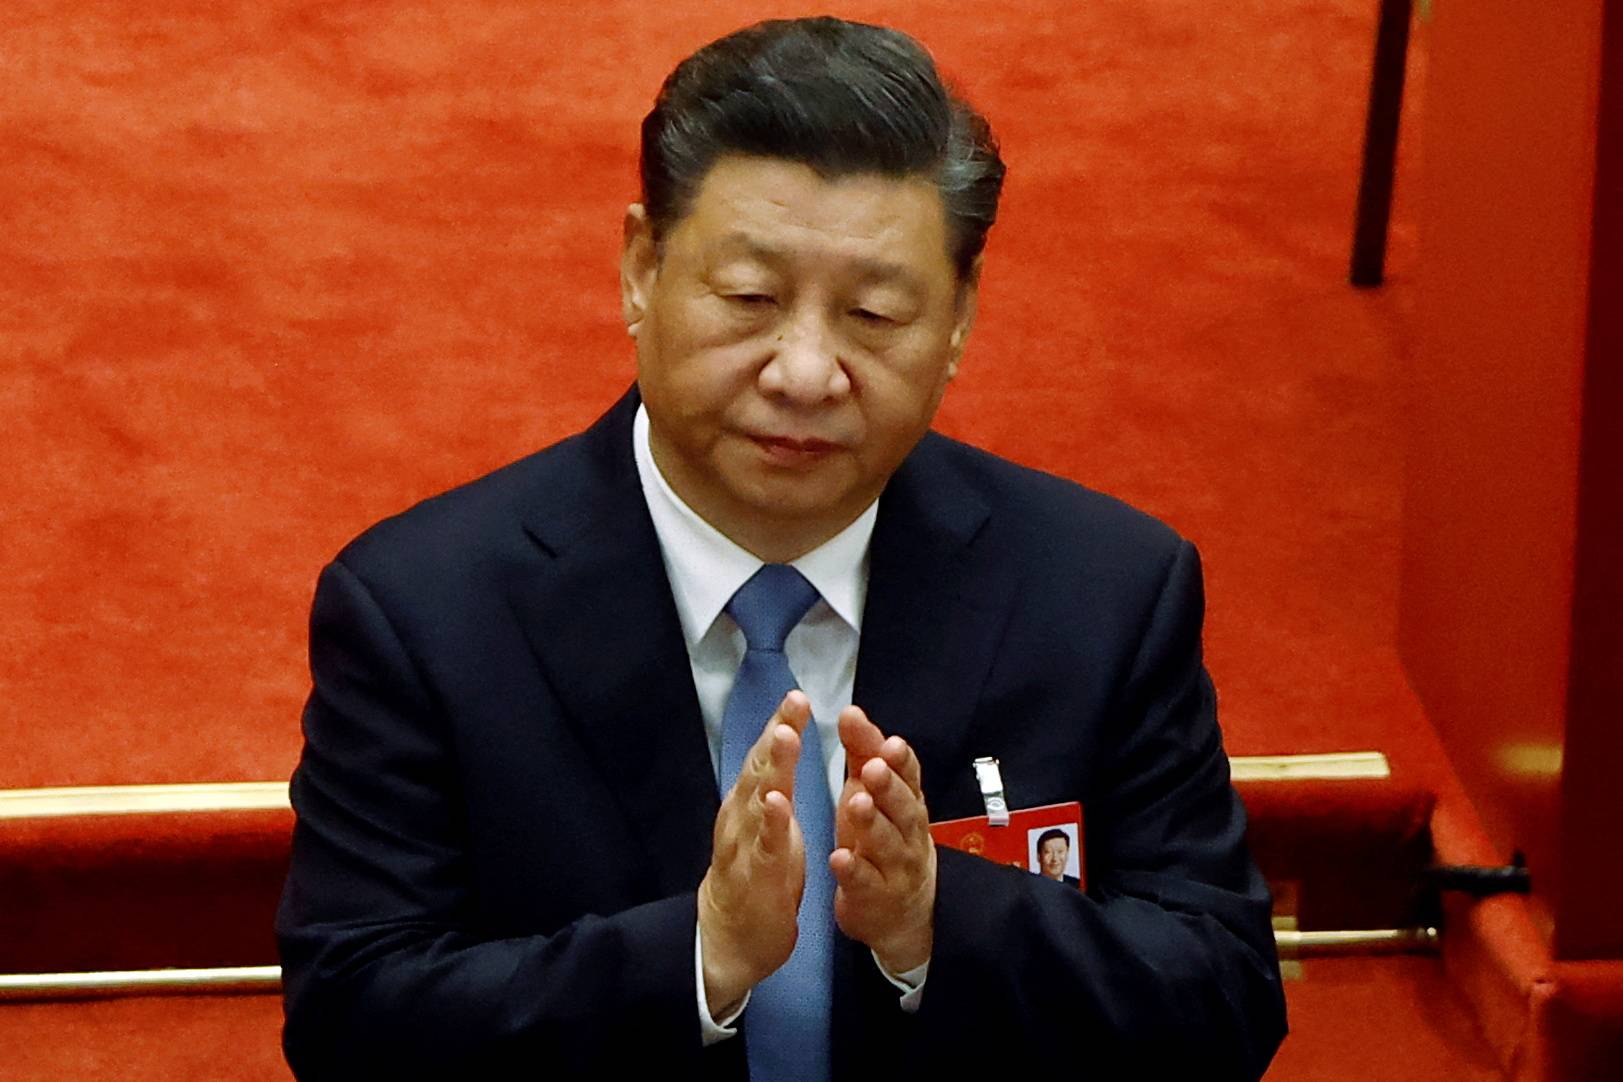 Chinese President Xi Jinping applauds at the opening session of the National People's Congress at the Great Hall of the People in Beijing, on March 5. Wariness toward Chinese assets has only increased since Russia attacked Ukraine just weeks after a Beijing summit reinforced the close ties between Xi and Russian President Vladimir Putin. | REUTERS